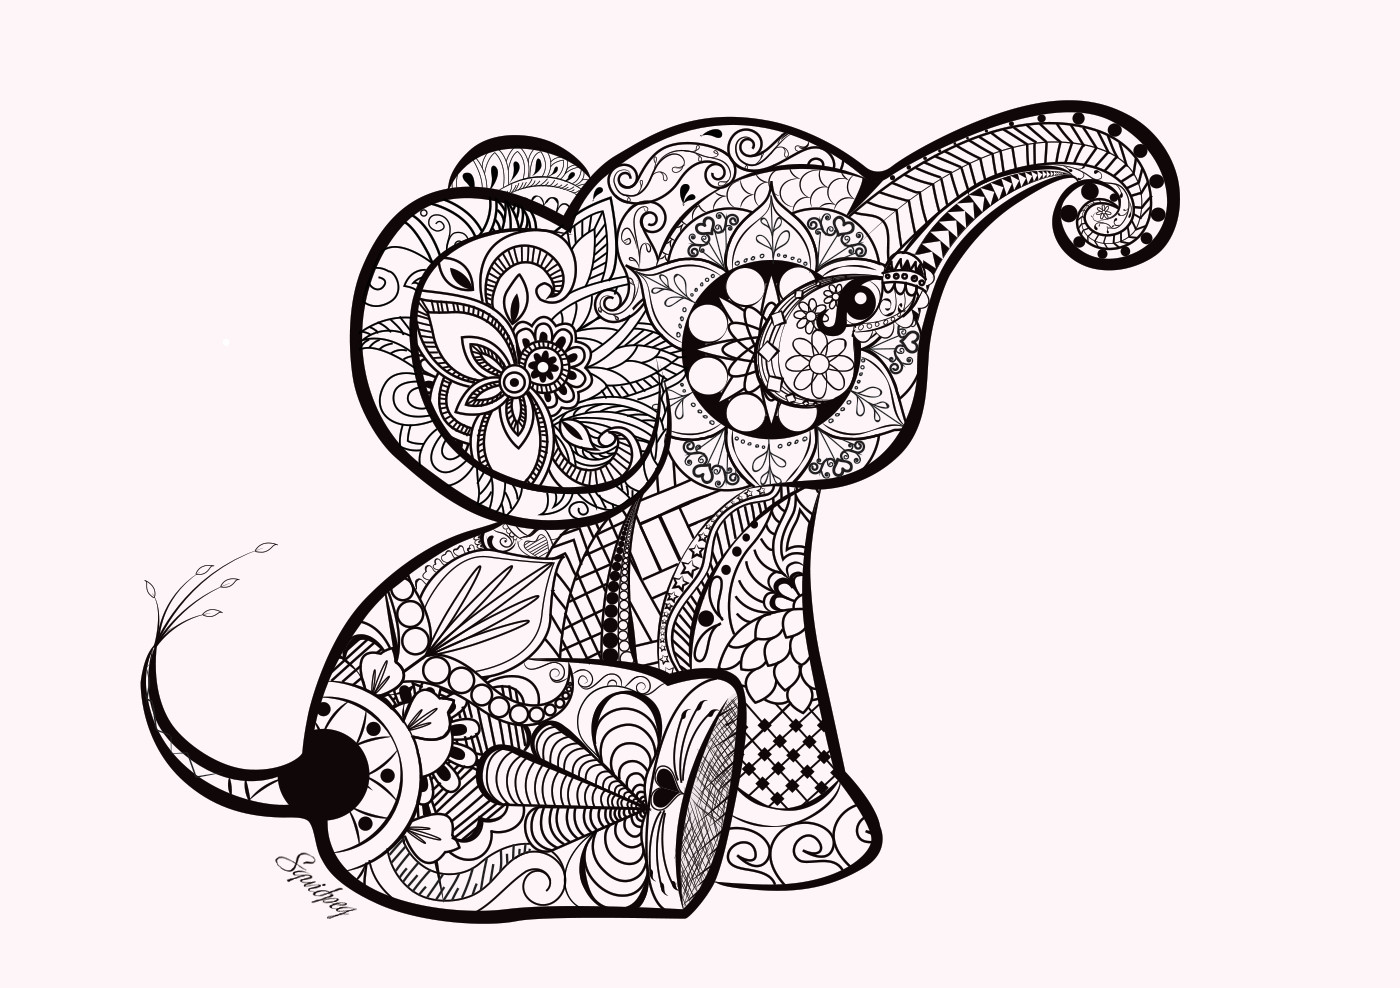 Elephant Adult Coloring Pages
 Baby Elephant Doodle on Behance